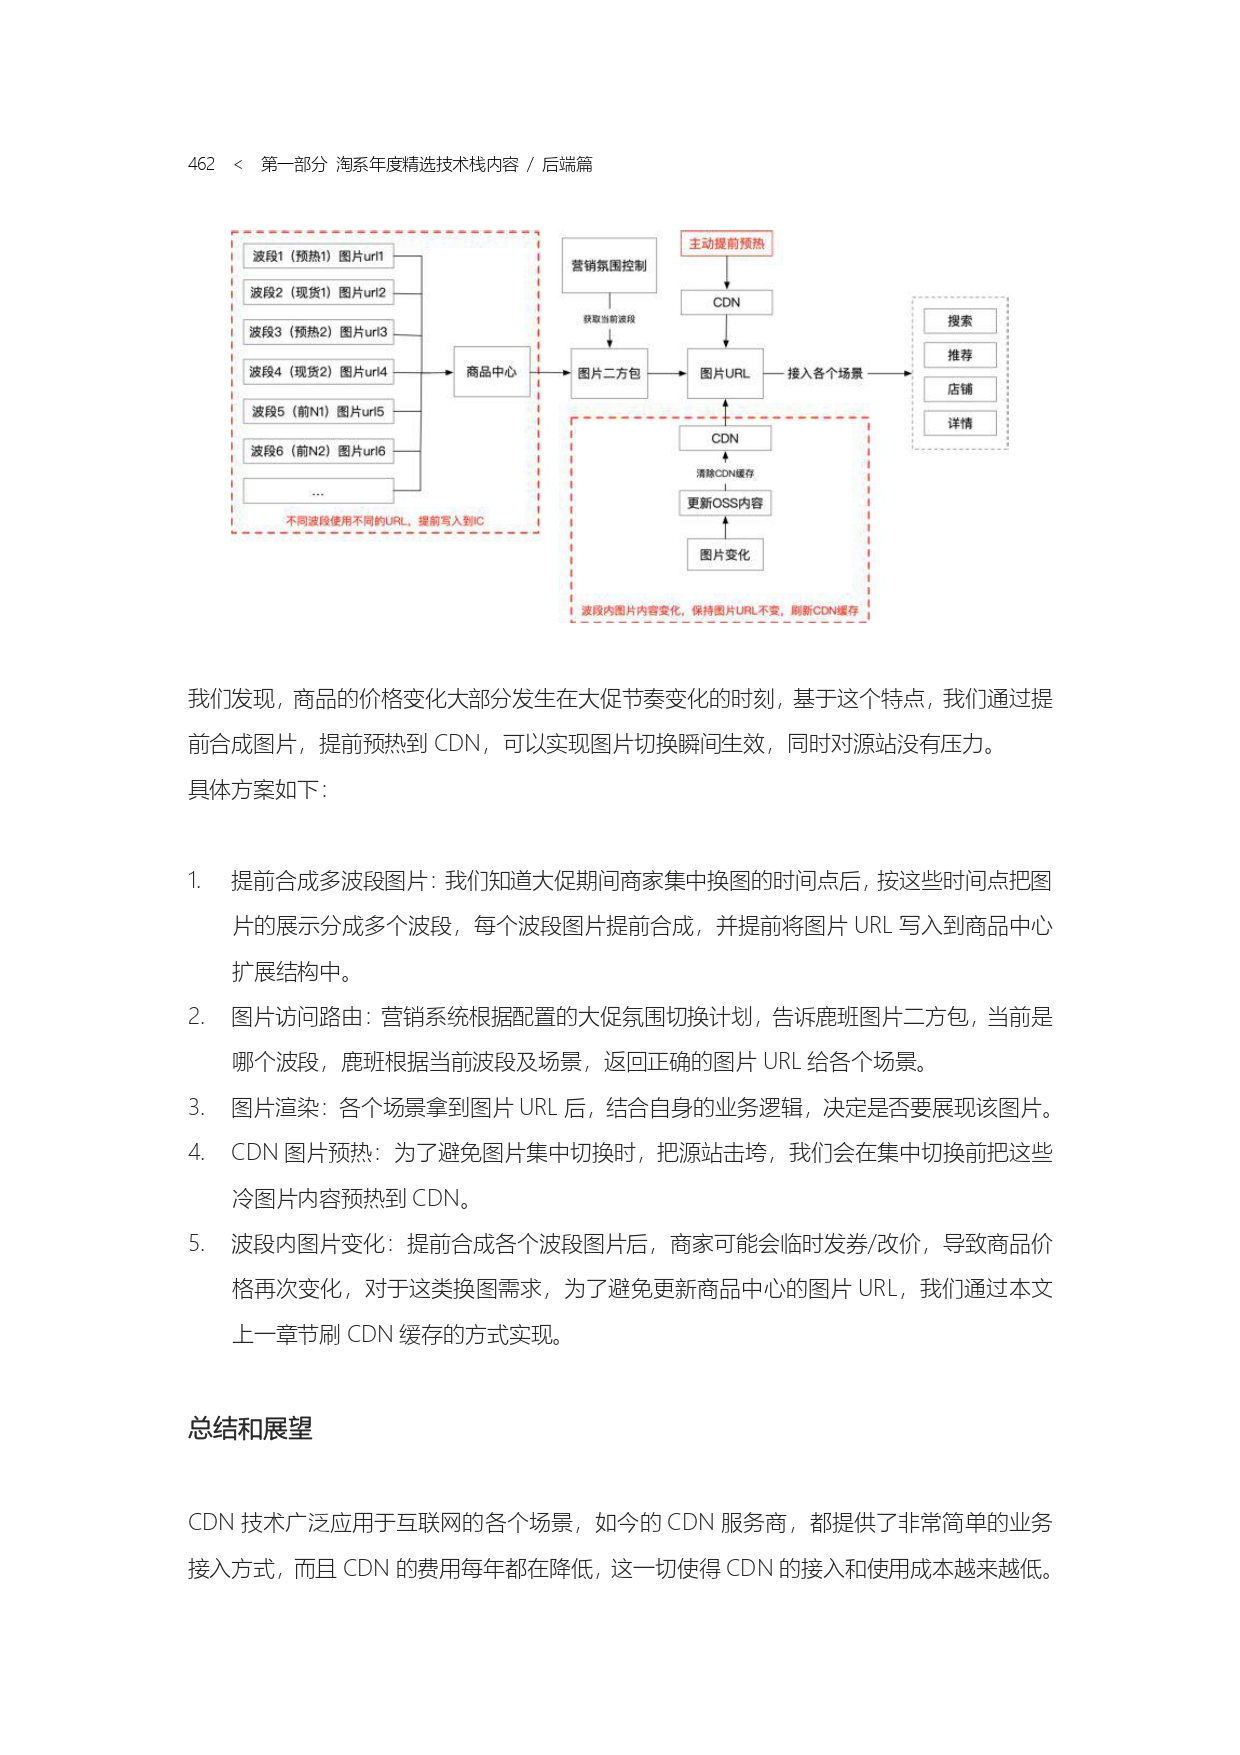 The Complete Works of Tao Technology 2020-1-570_page-0462.jpg